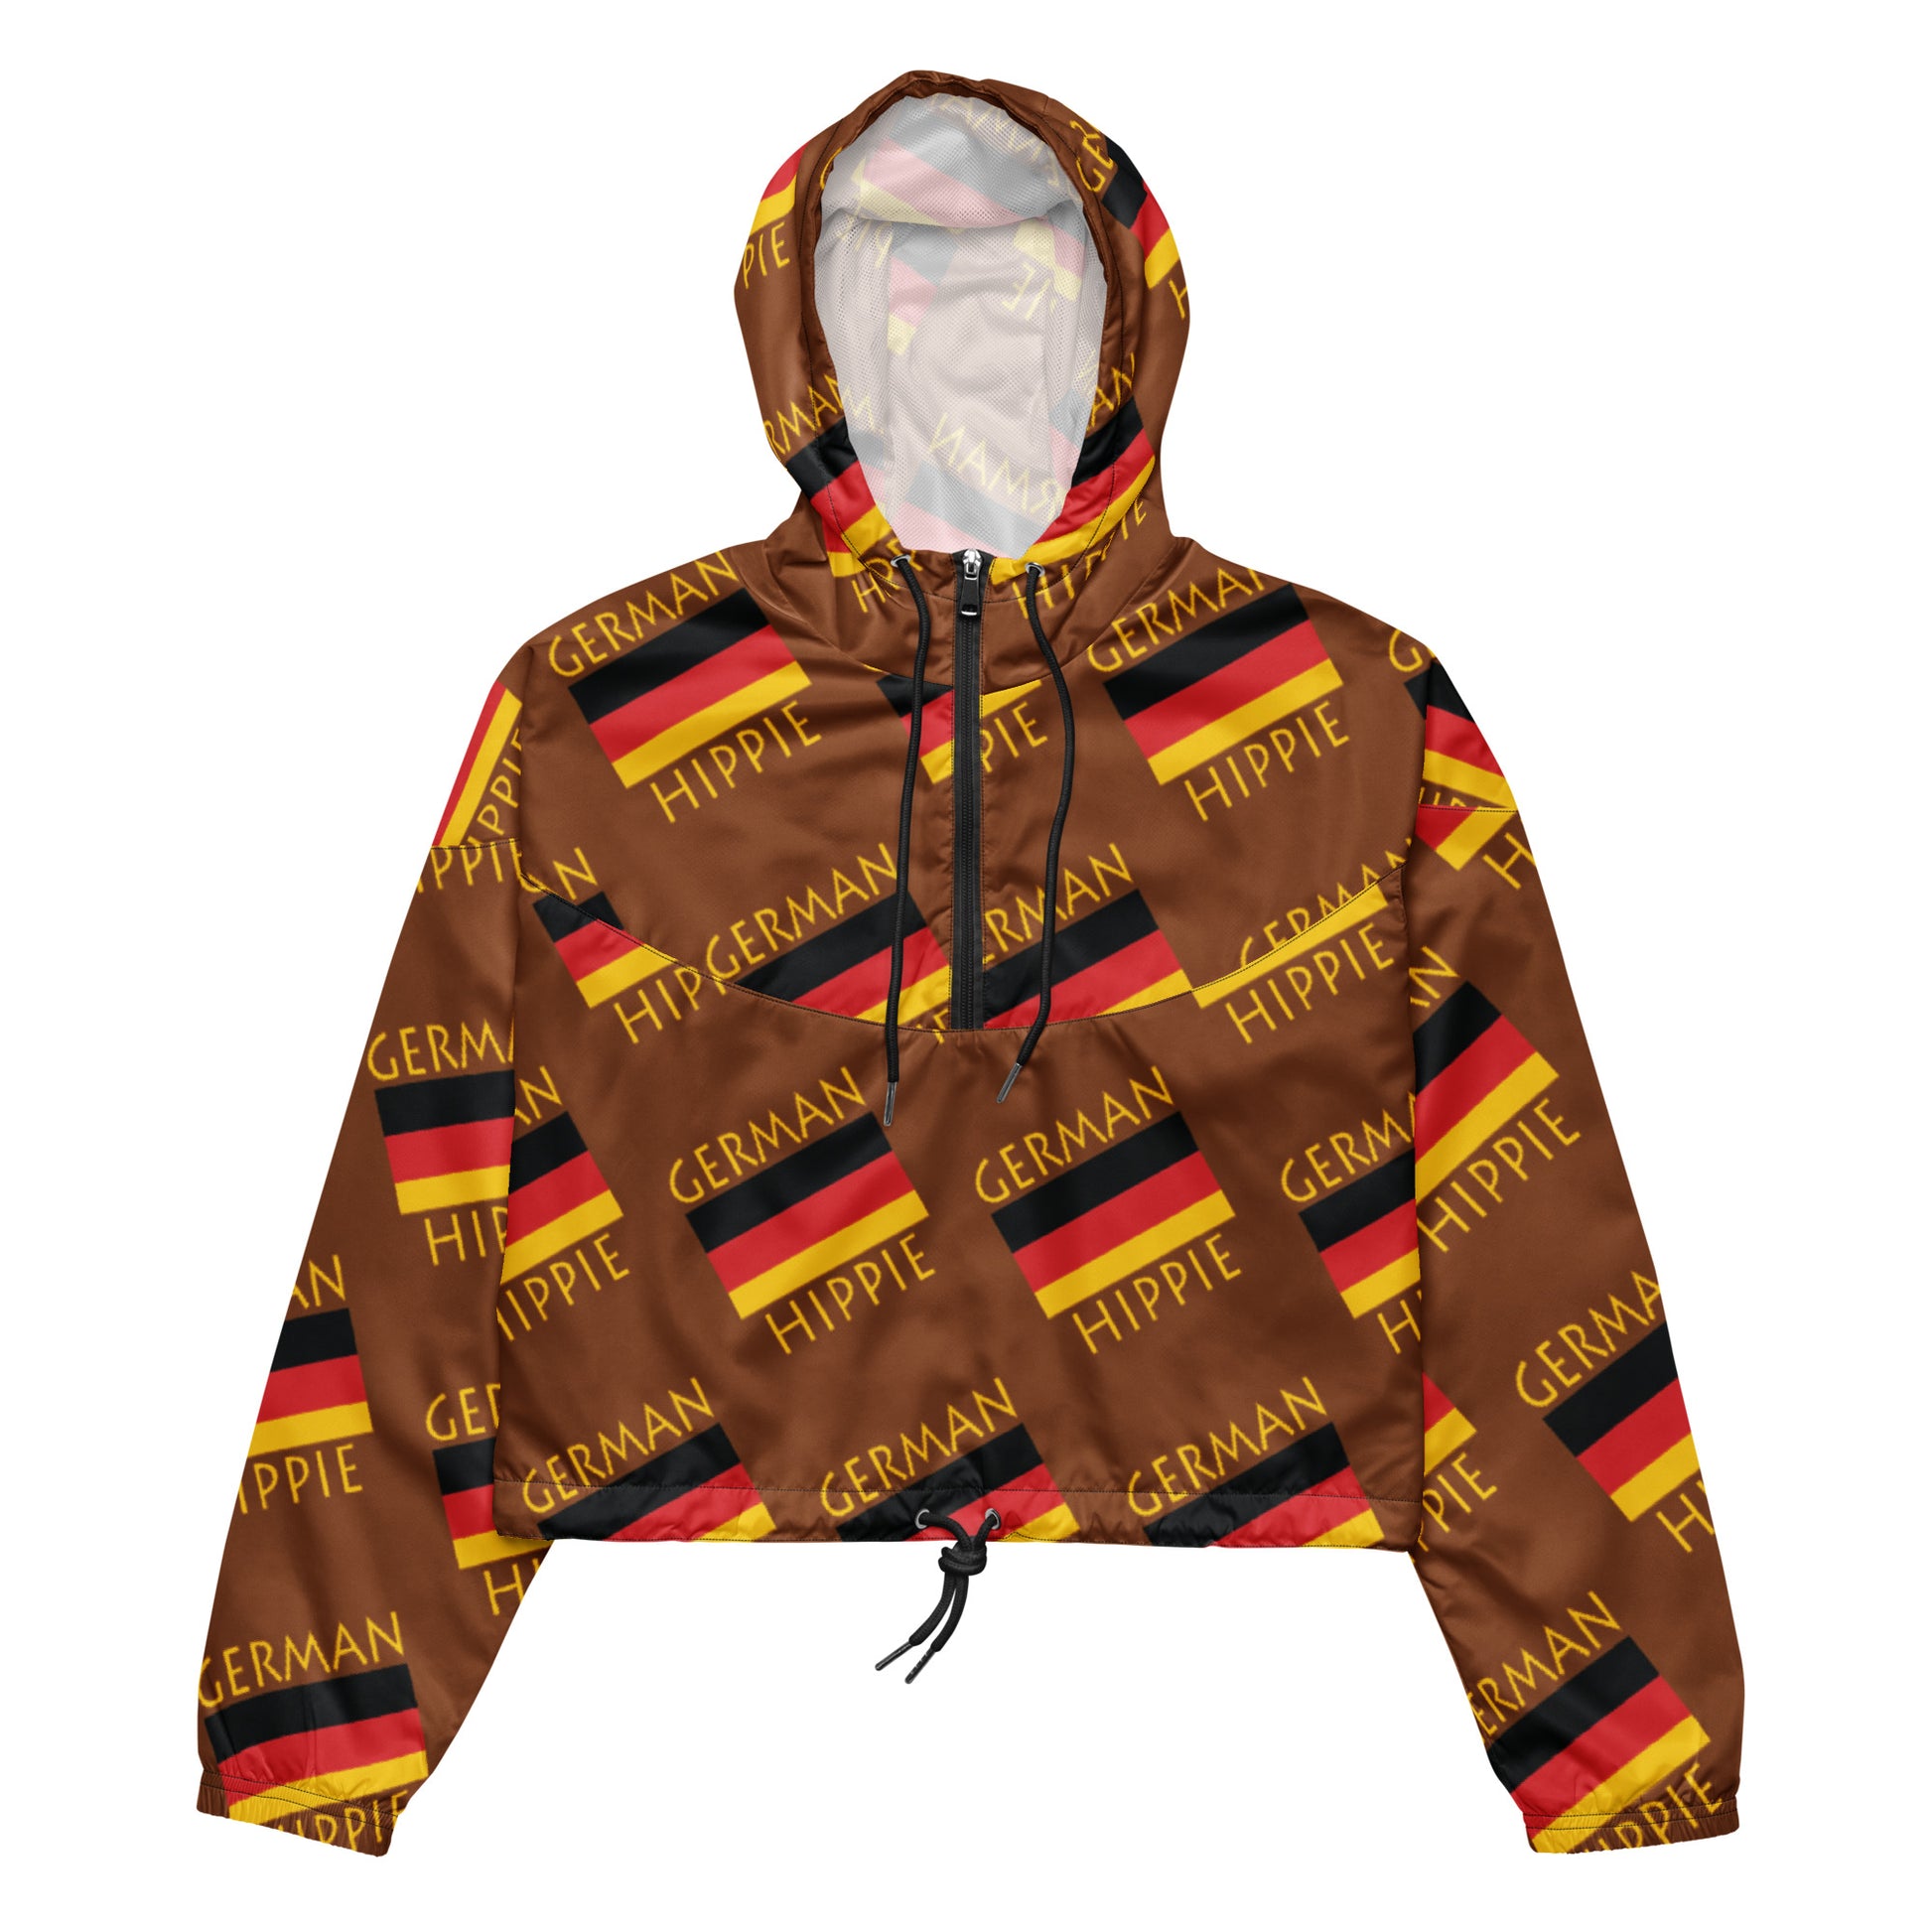 Your German Flag Hippie Stylish cropped windbreaker half-zip jacket is a fashion statement! Hiking or hanging out it is super functional while making you look beautiful. Features include side-slit pockets, breathable mesh lining, and adjustable draw cords on the hood and waist to support all your stylish outdoor looks & lifestyle.